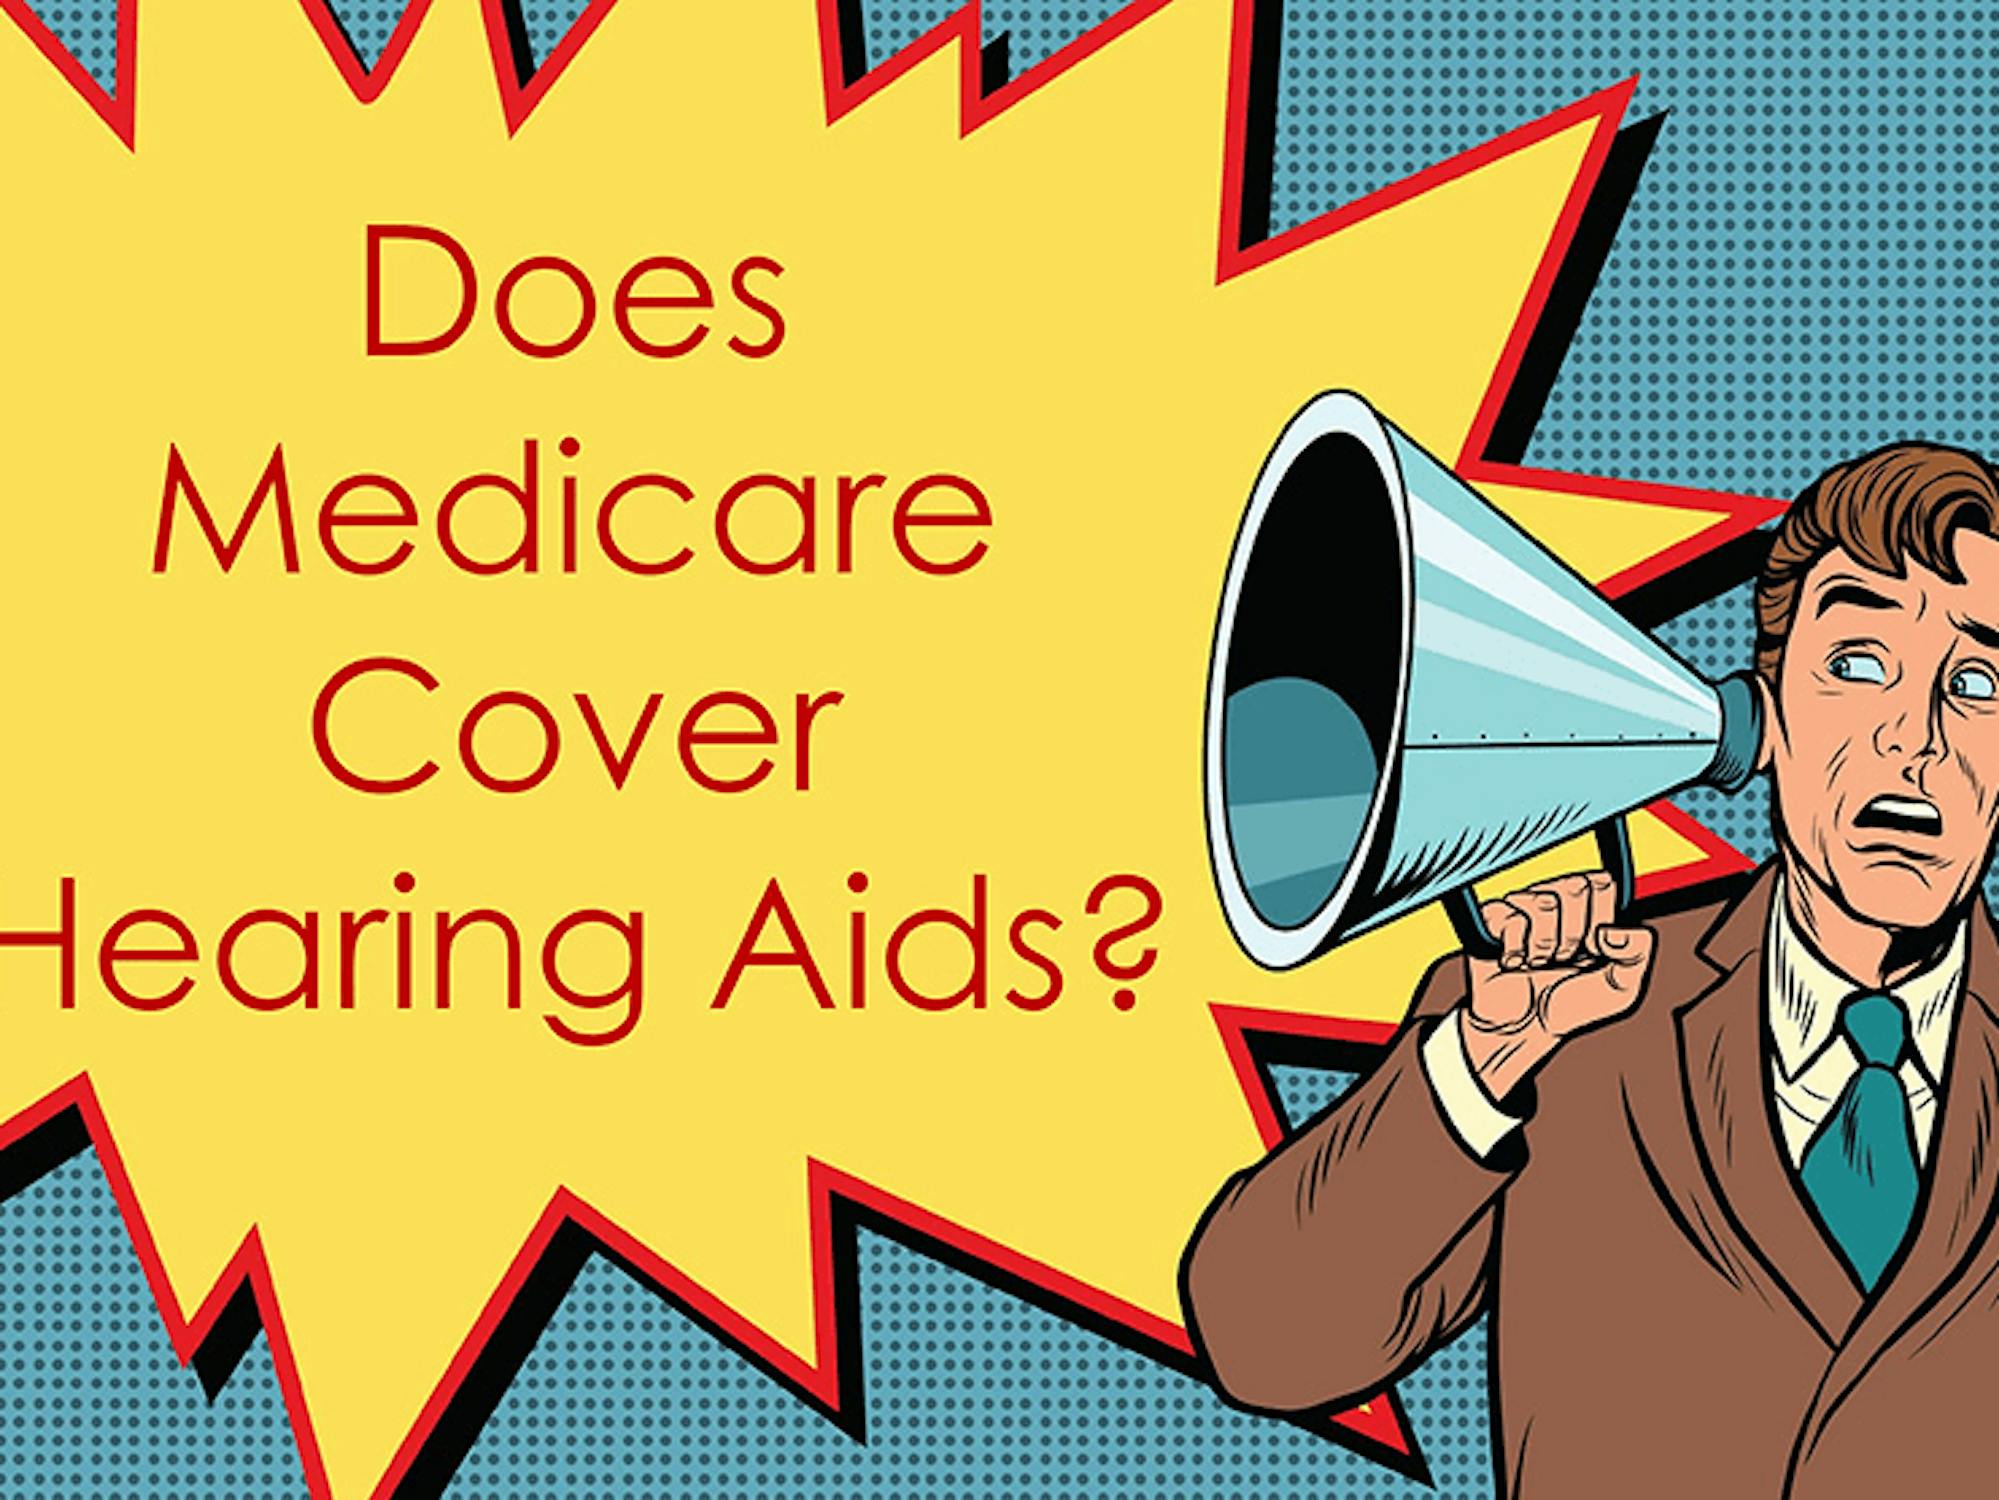 Does Medicare Cover Hearing Aids? ClearMatch Medicare